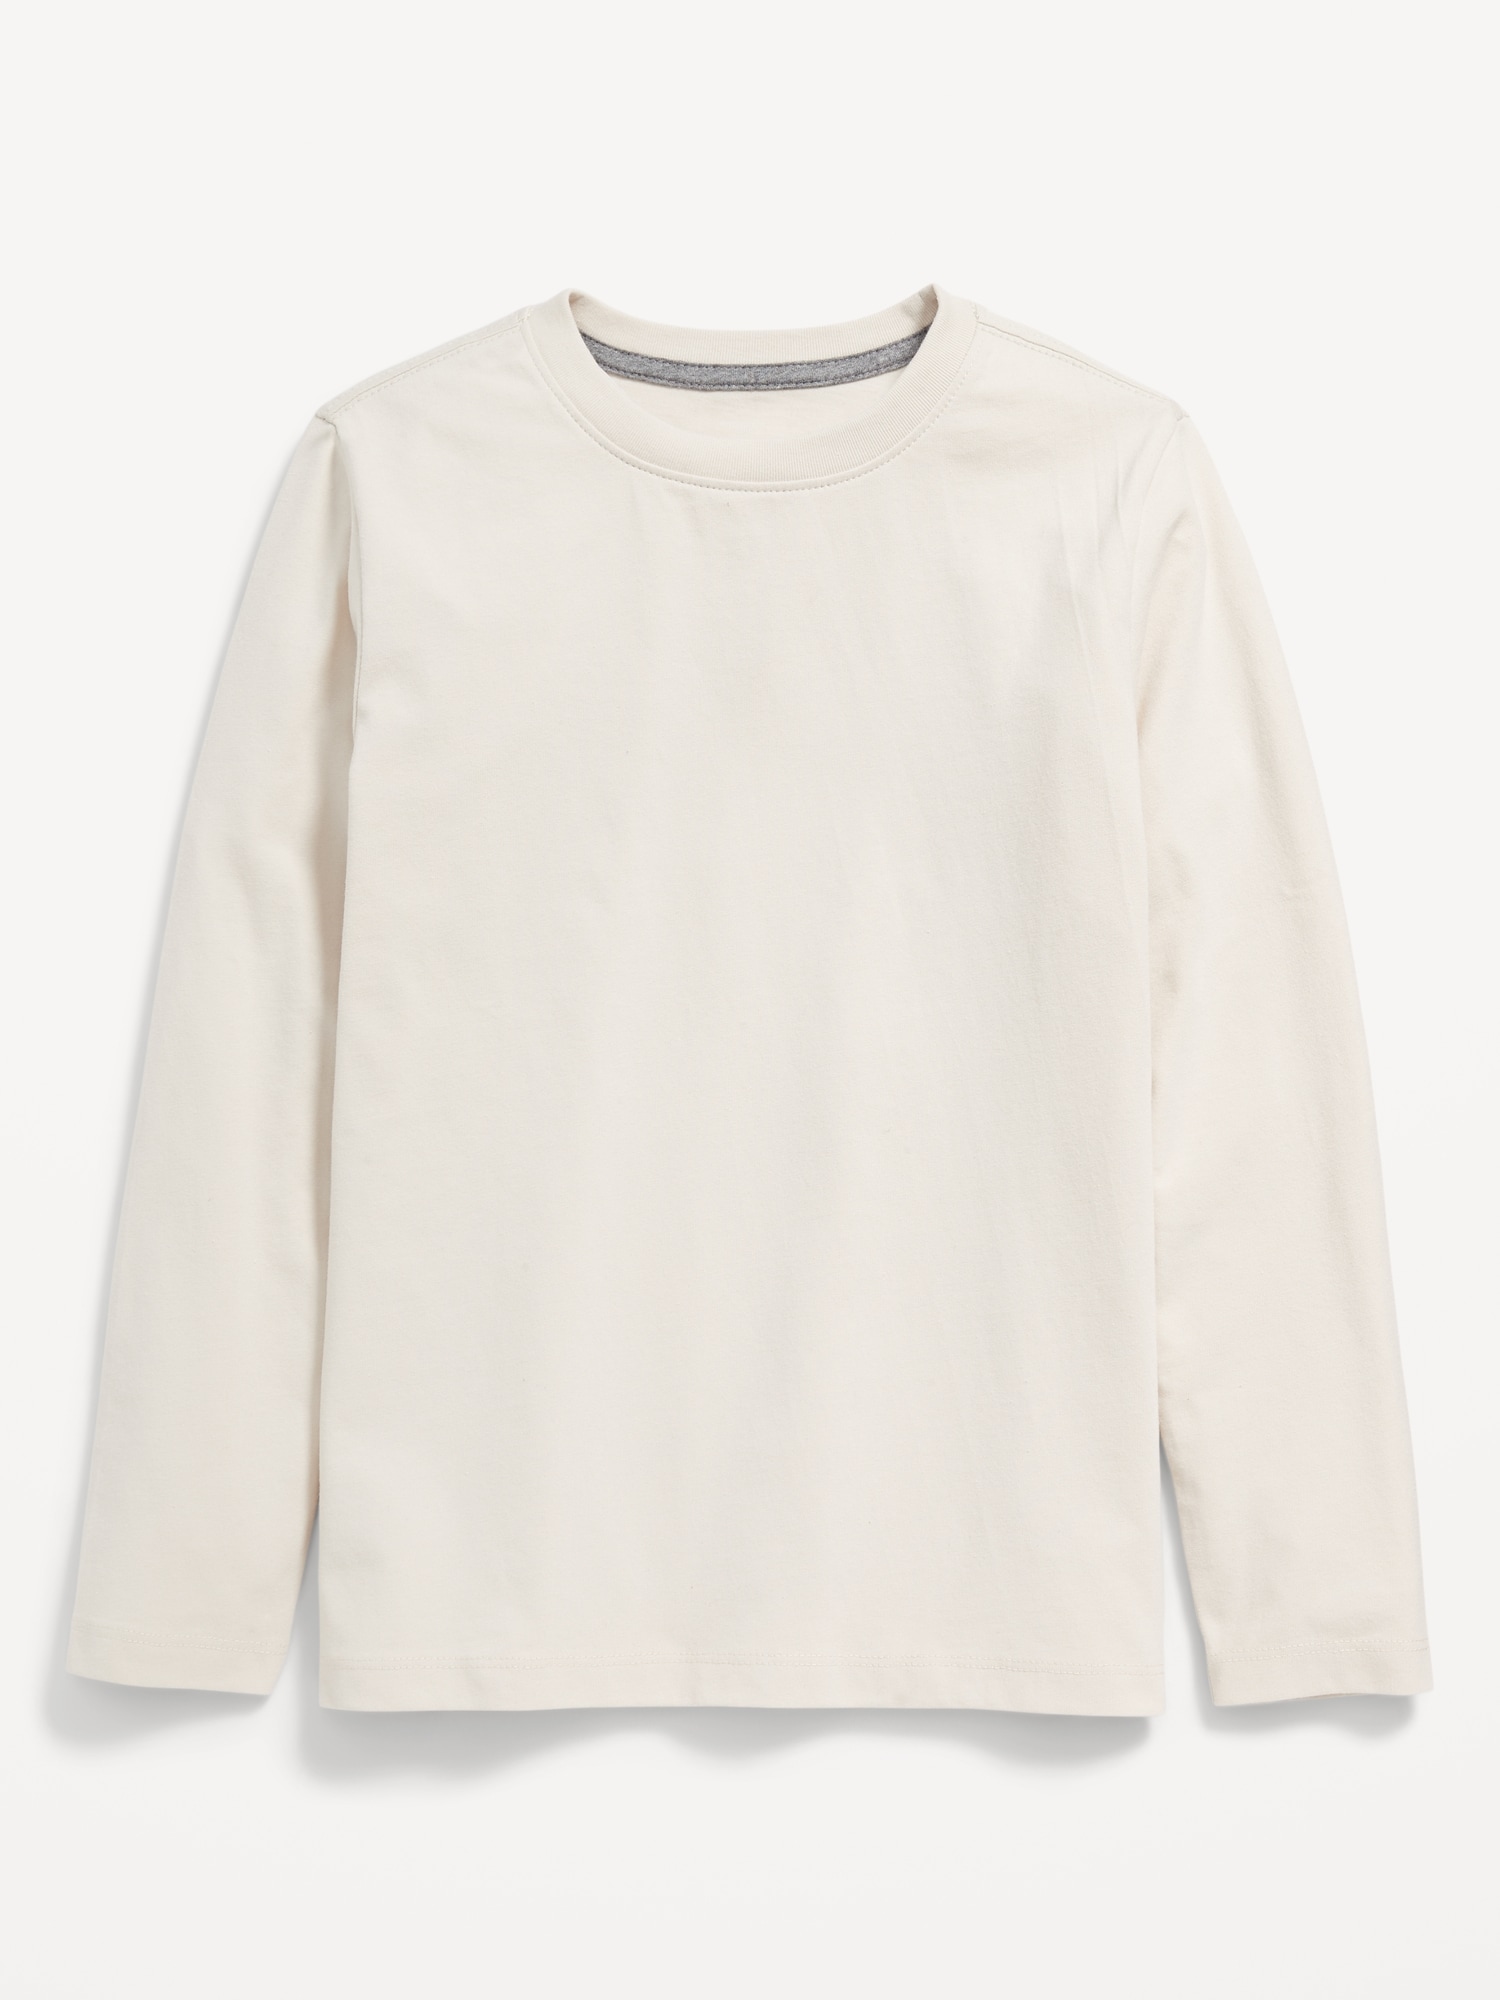 Softest Long-Sleeve T-Shirt for Boys | Old Navy